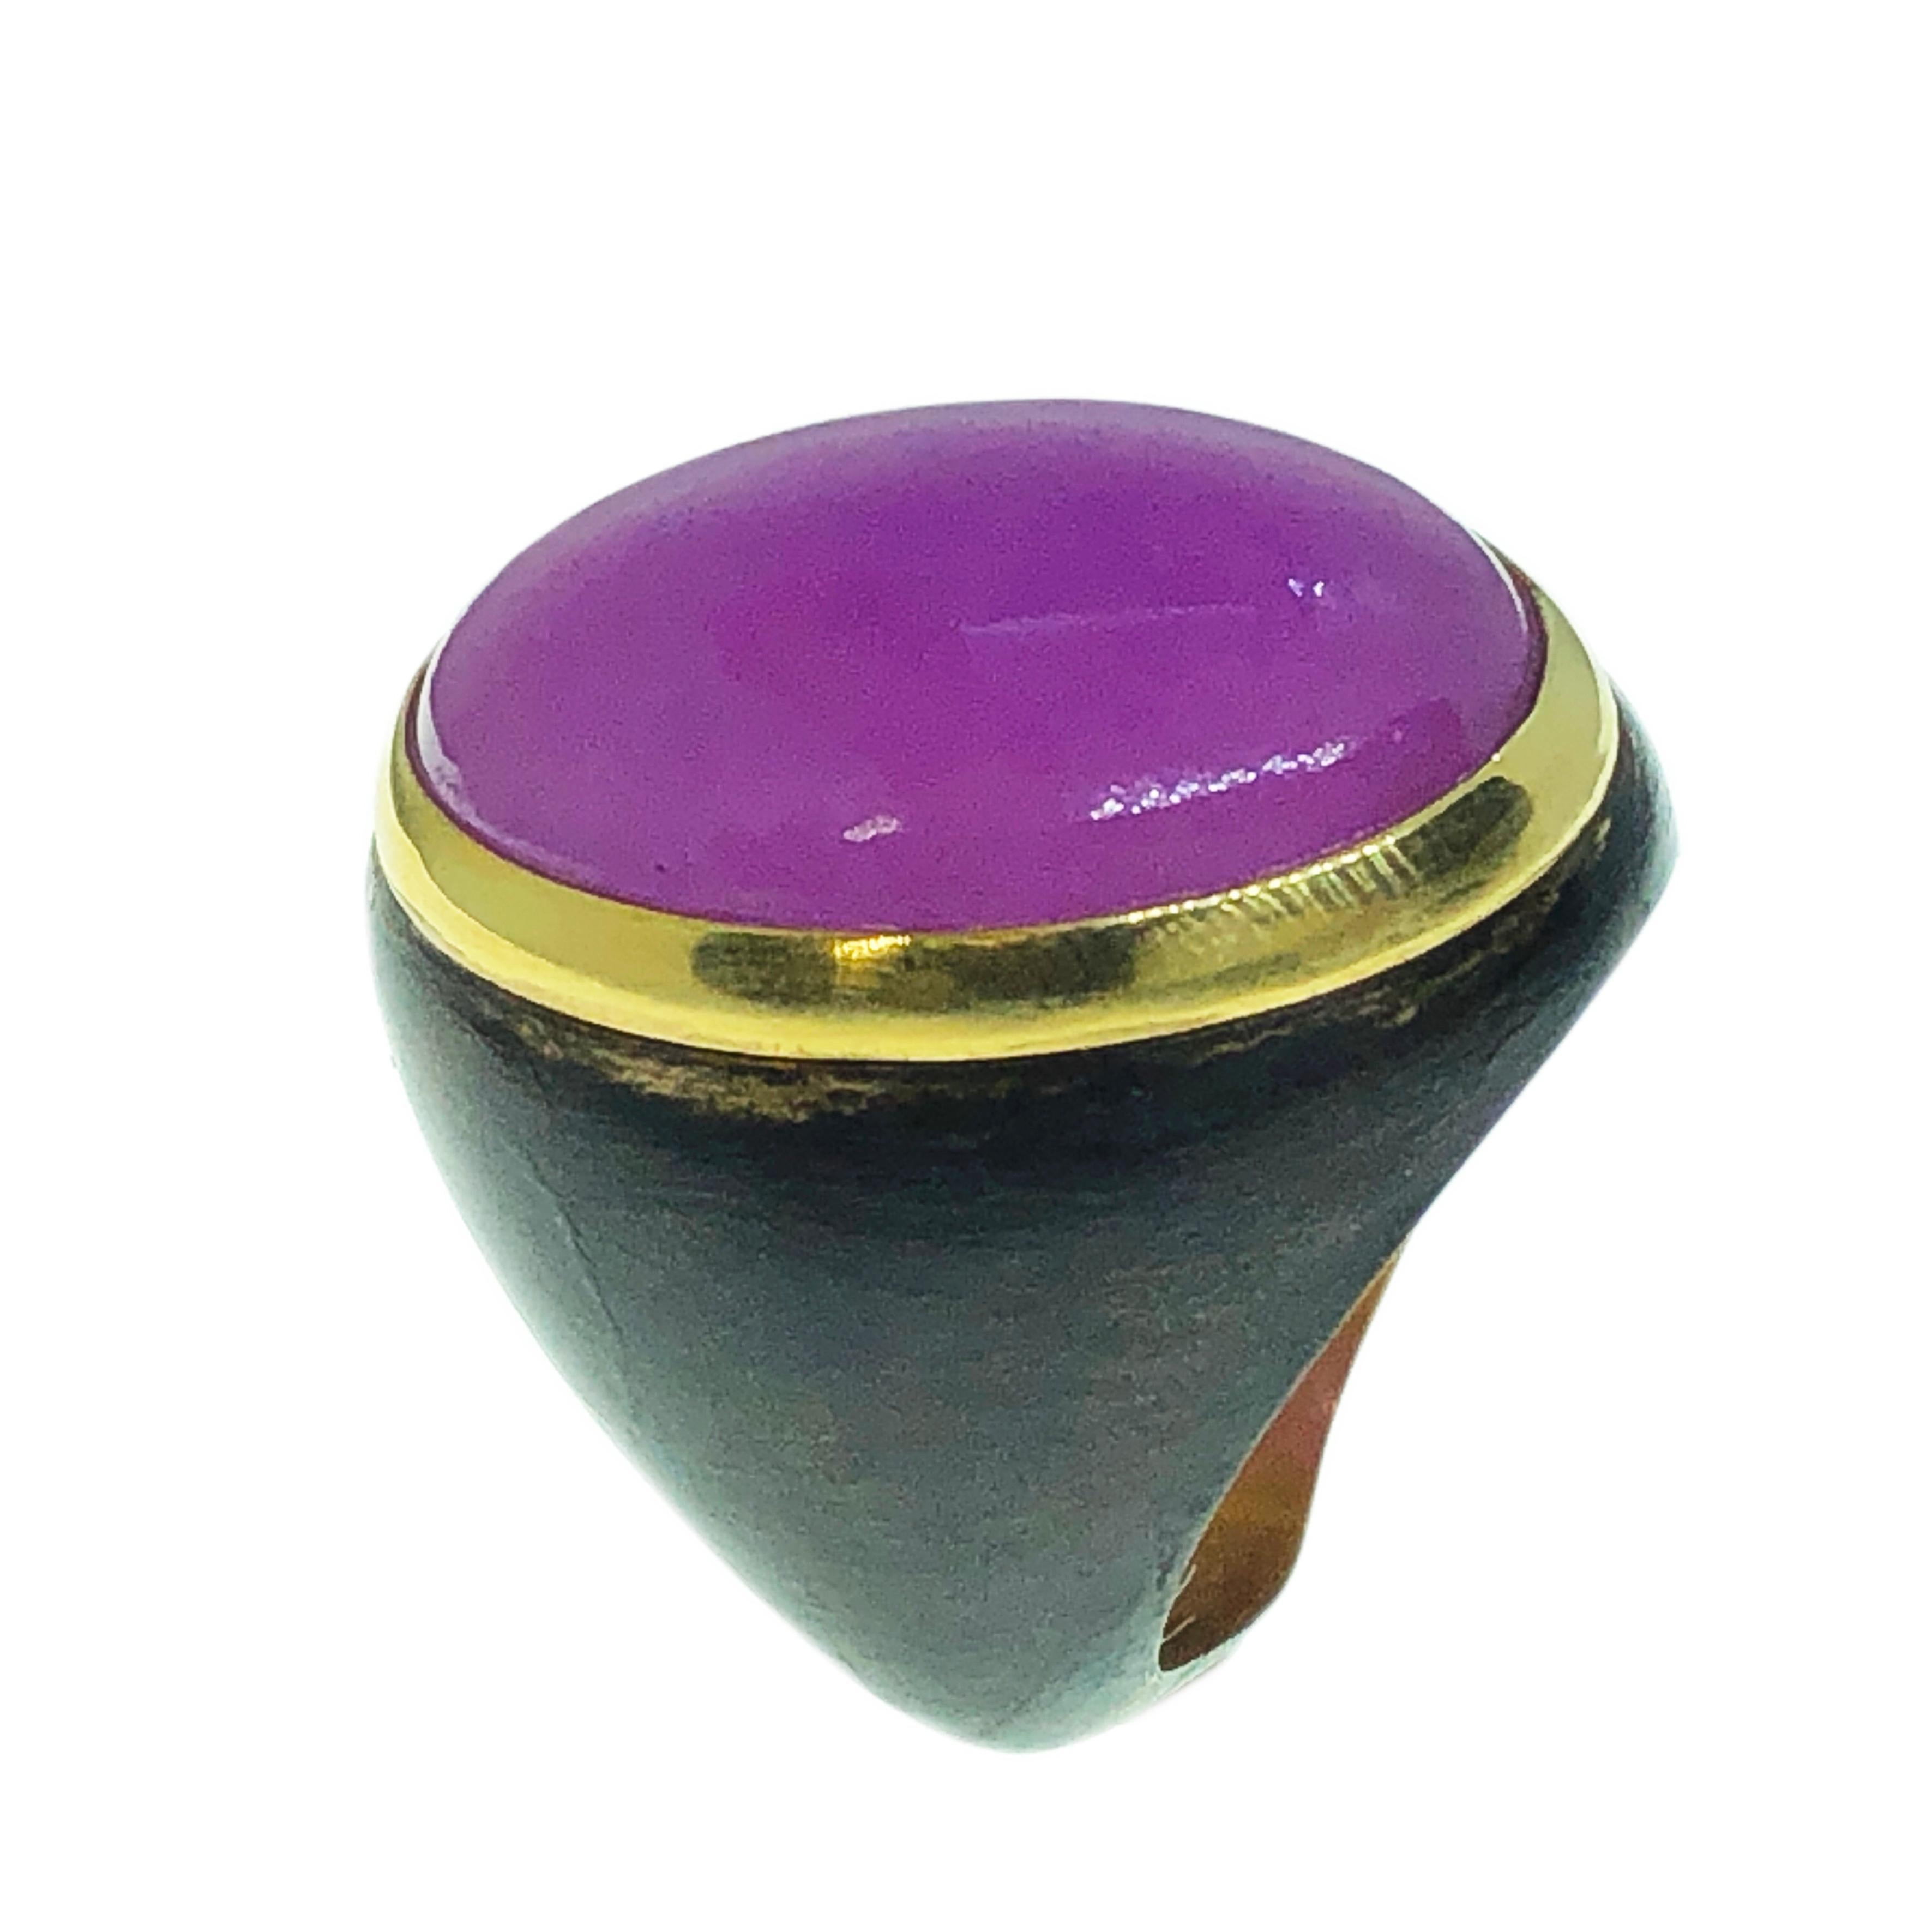 One-of-a-kind Contemporary Cocktail Ring Featuring a 20 Carat Natural Lavender Jade Cabochon (0.911x0.666in) in an 18K Yellow Gold Brown Oxidized Brass Setting.
The color-changing of the Lavender Jade's cabochon combined with the gold and brown